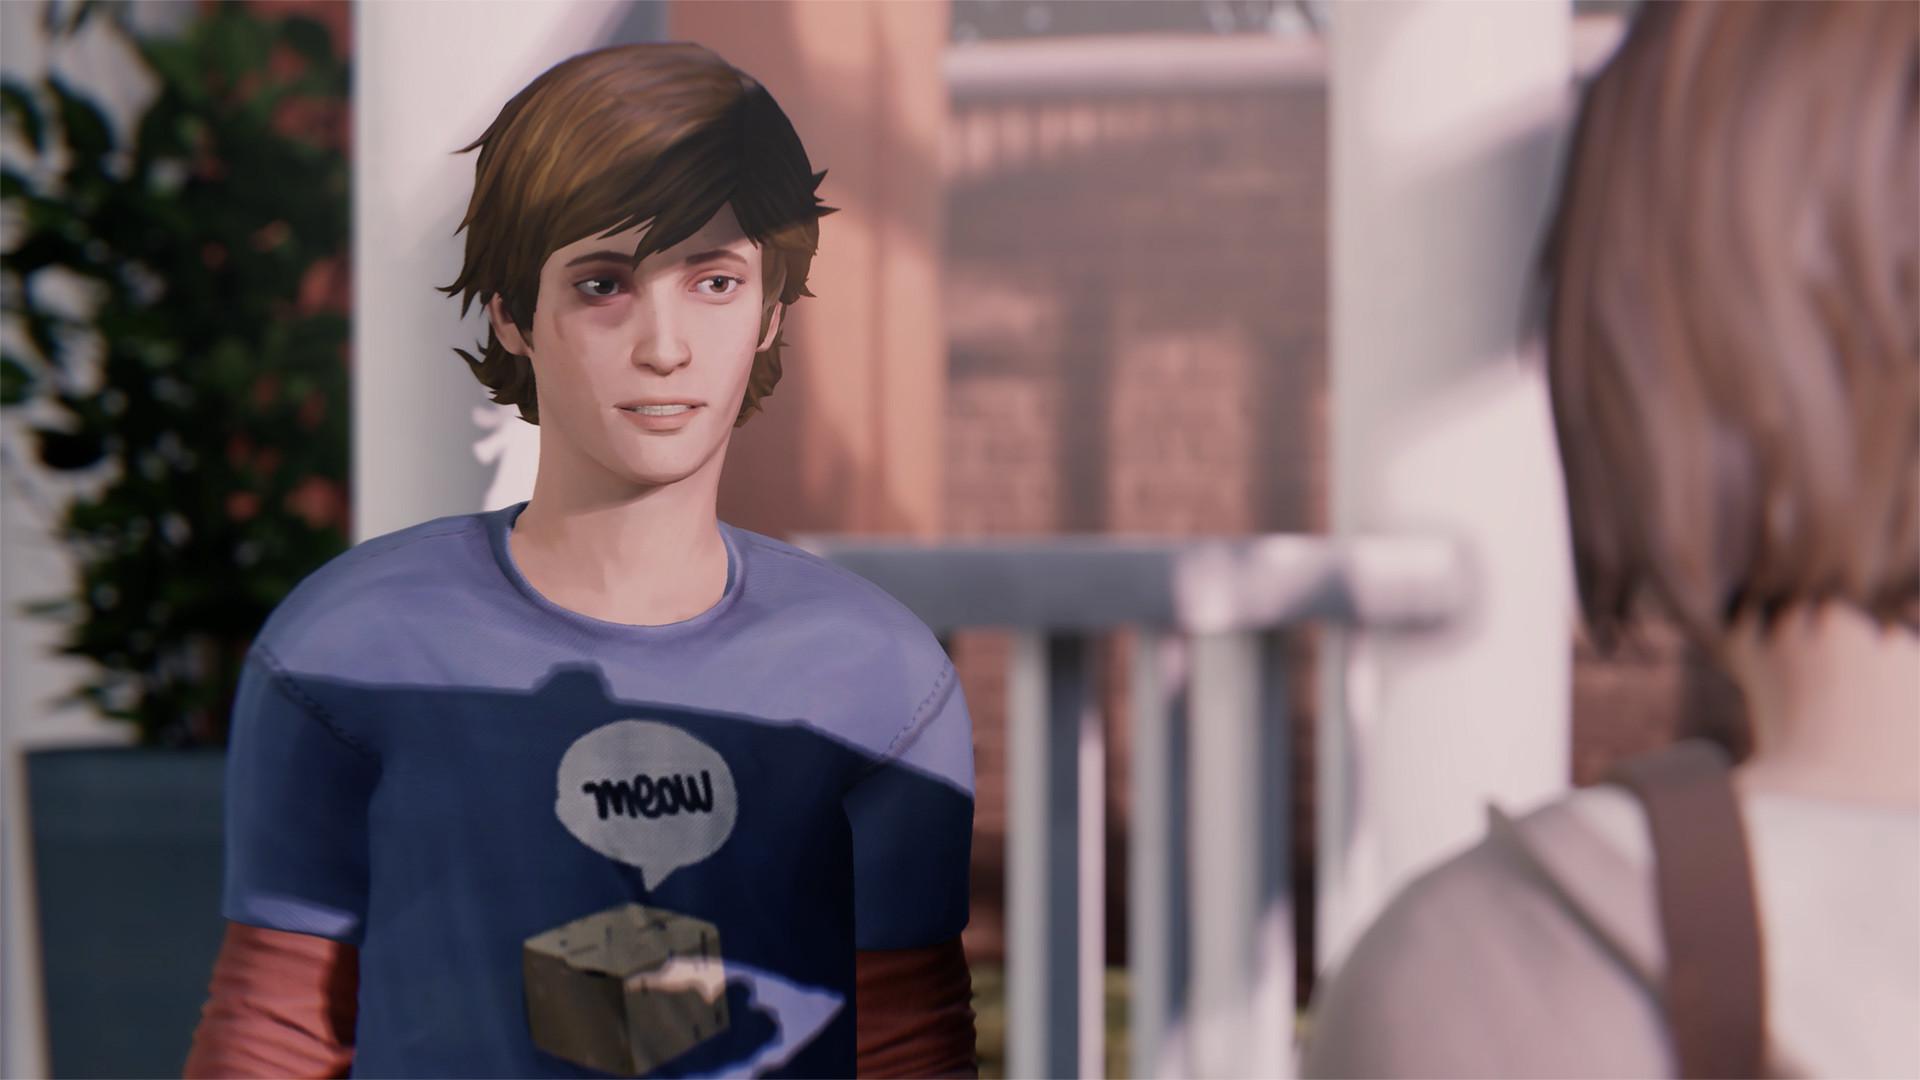 Screenshot №7 from game Life is Strange Remastered